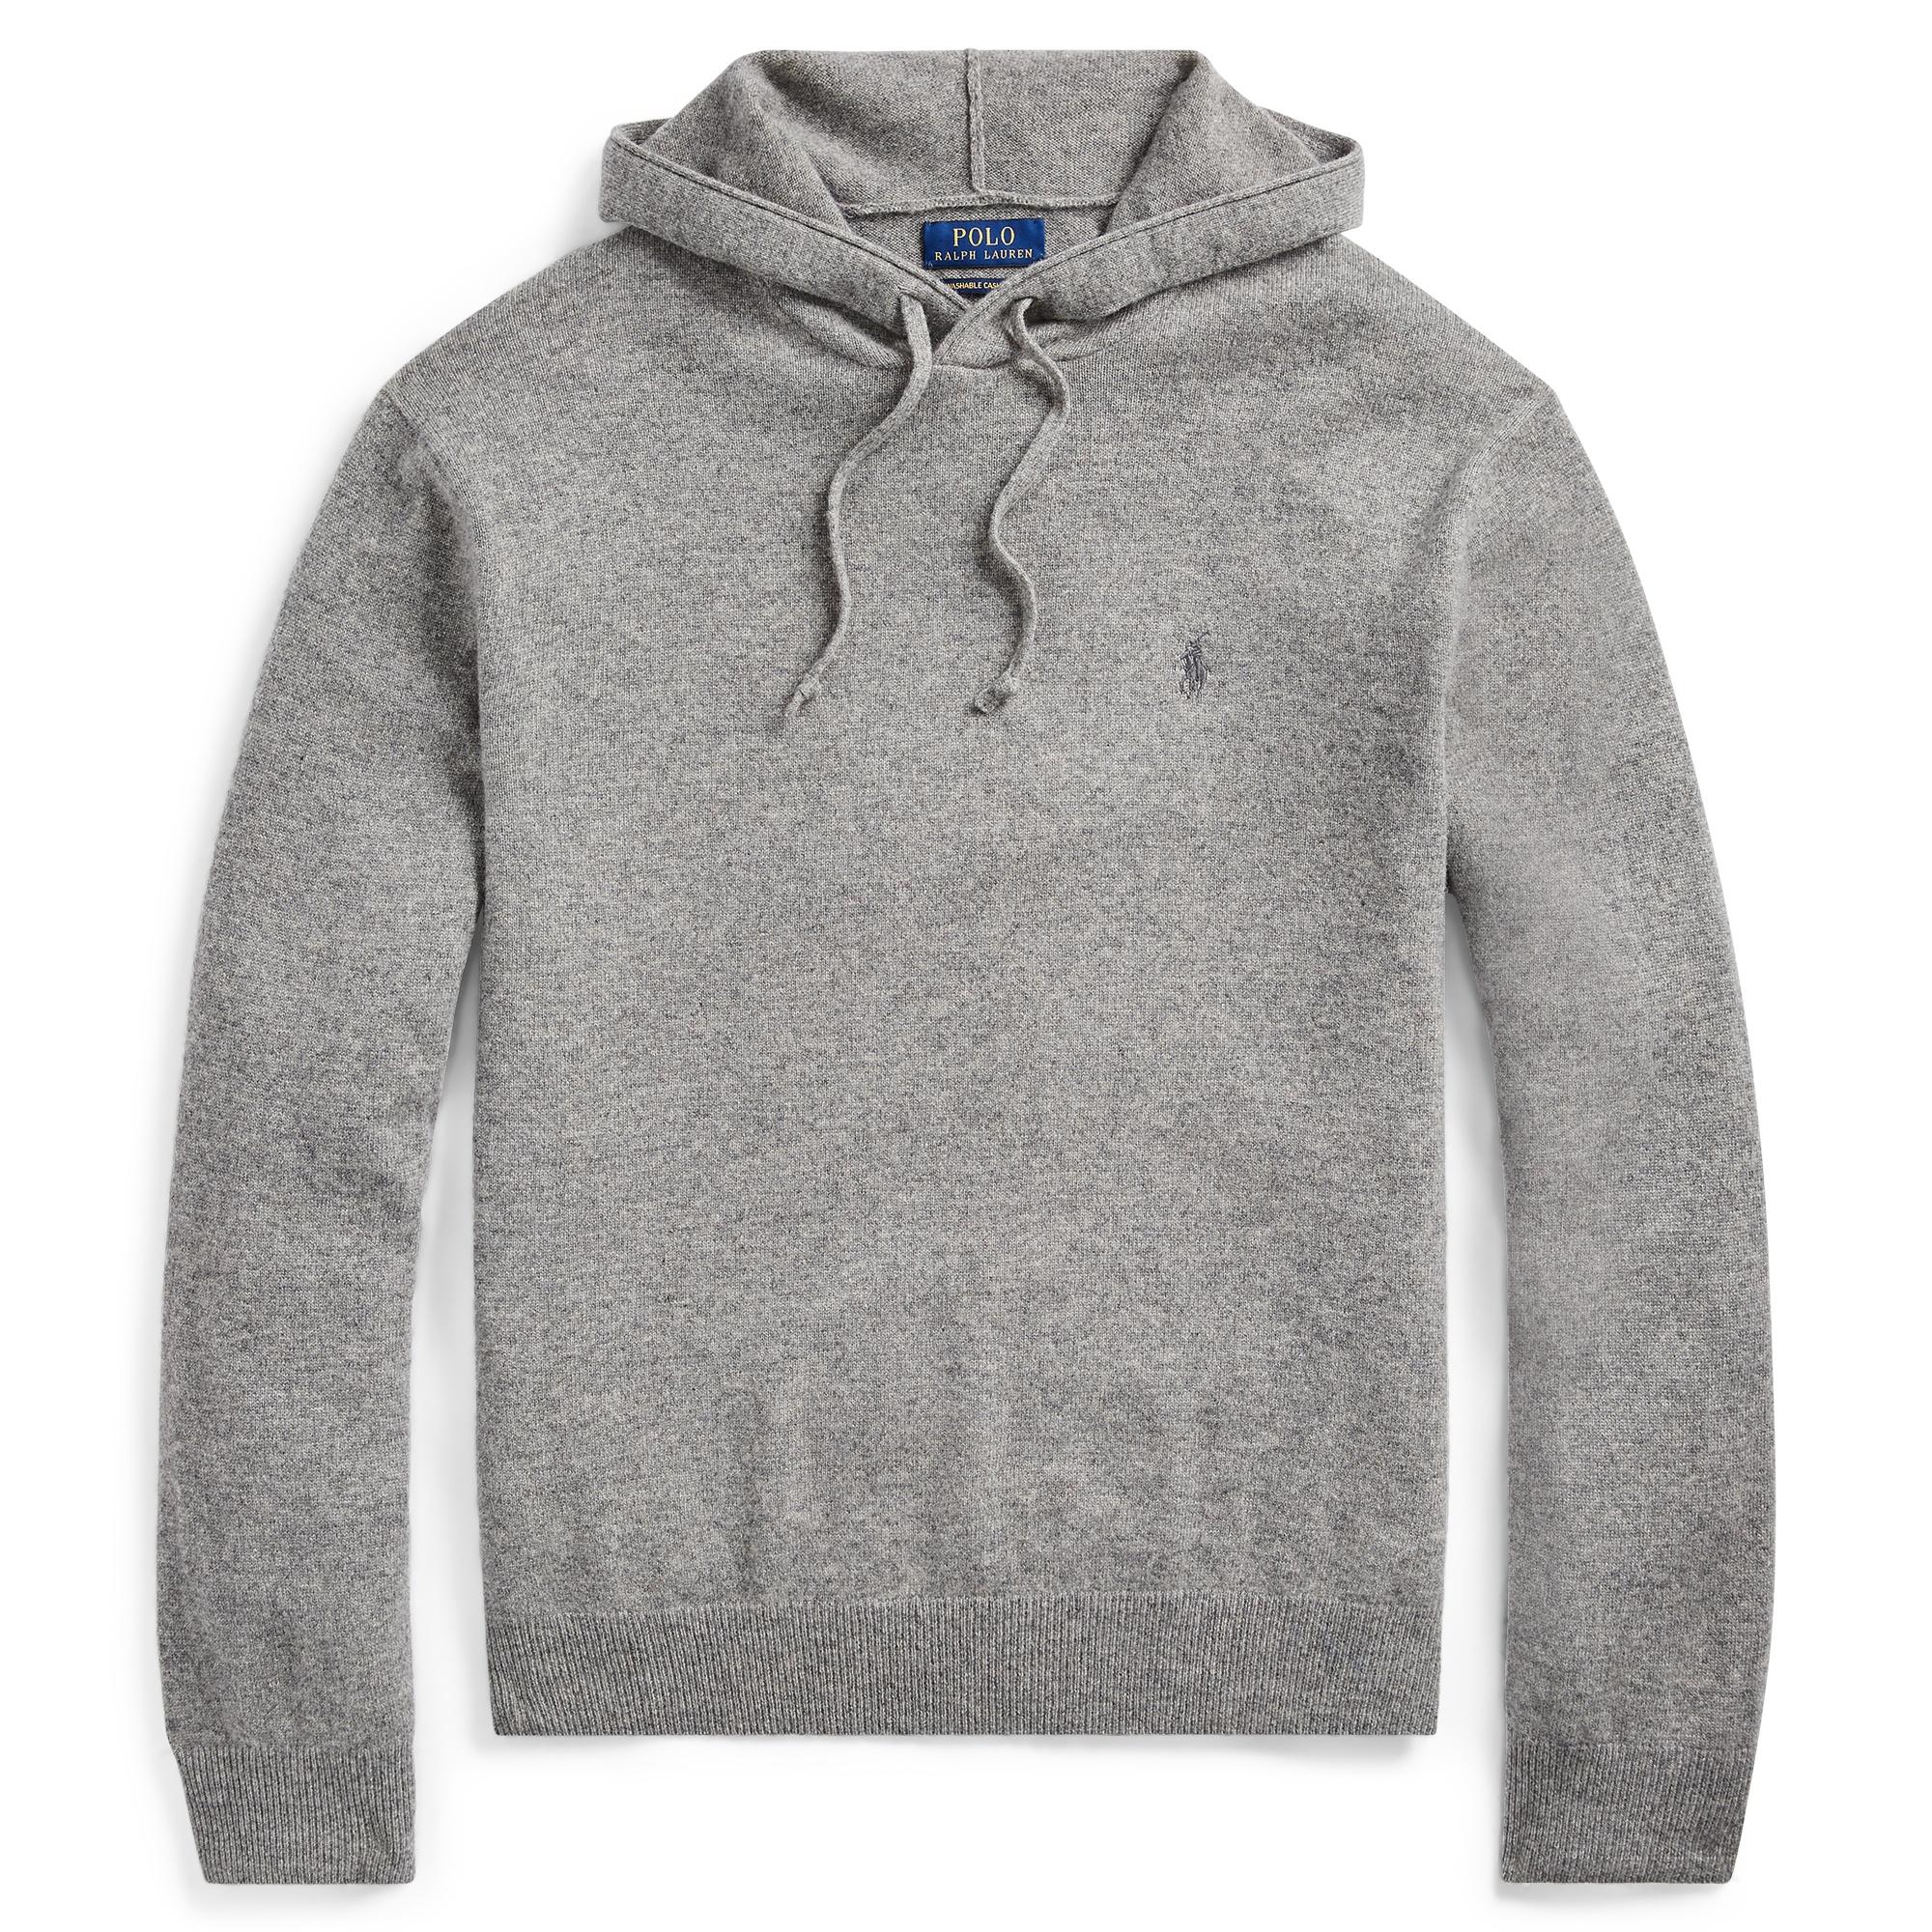 Ralph Lauren Washable Cashmere Sweater in Gray for Men - Lyst